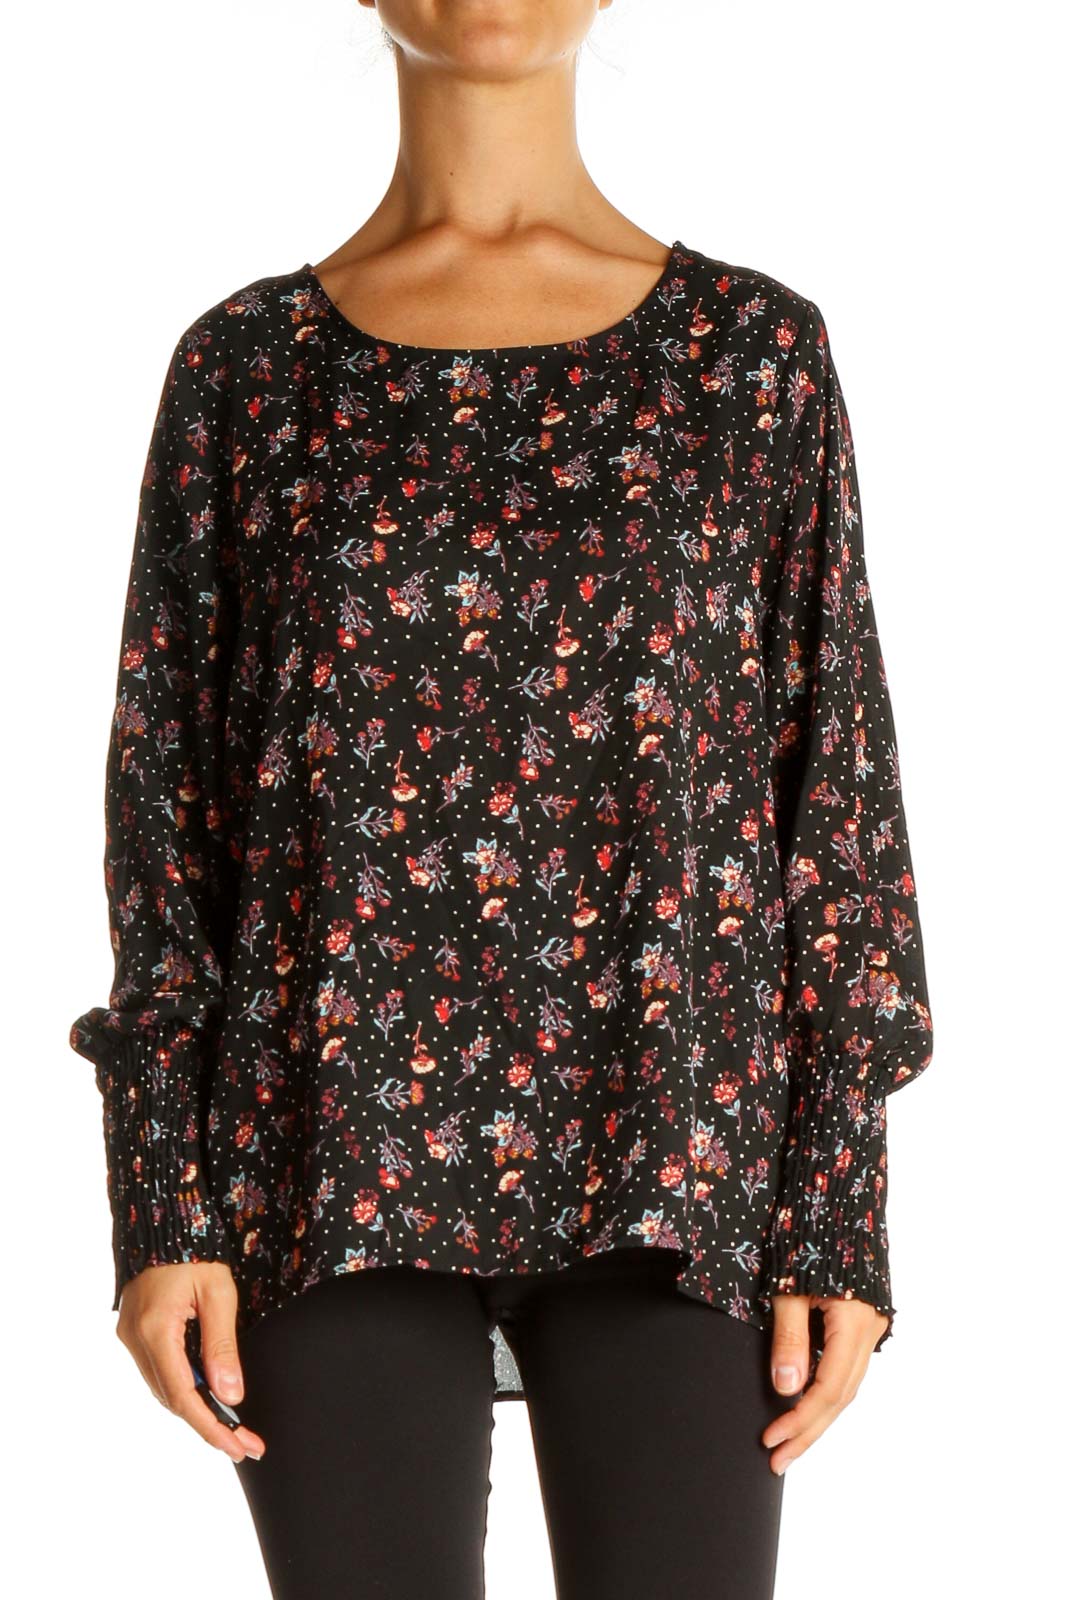 Black Floral Print All Day Wear Blouse Front